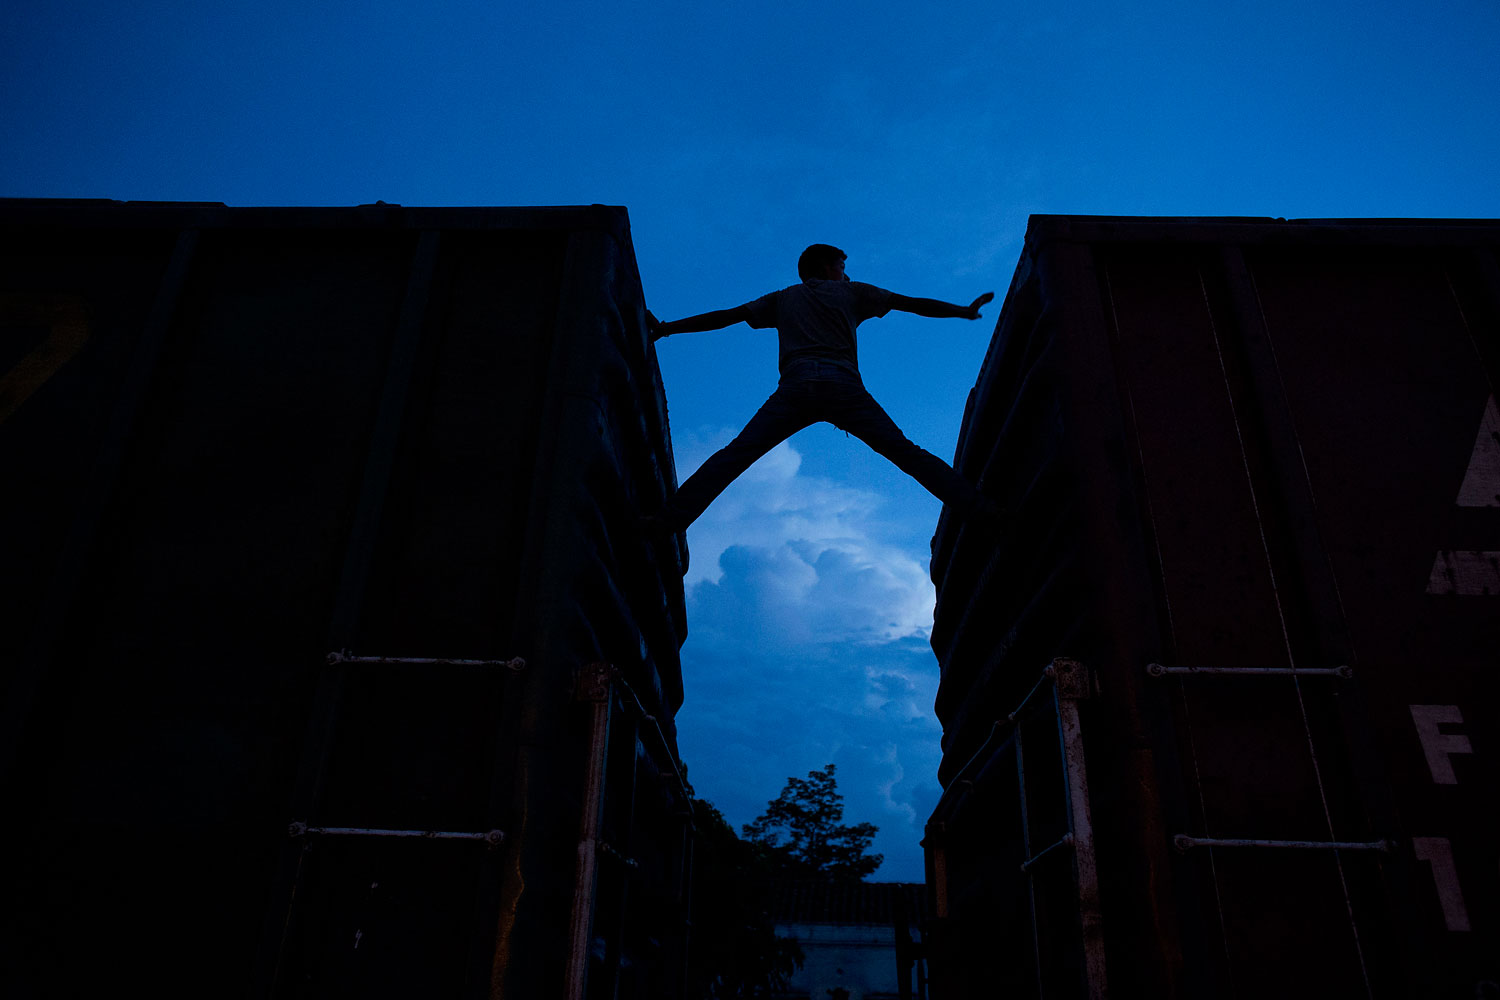 A Central American migrant practices scaling parked boxcars as he awaits the arrival of a northbound freight train in Arriaga, Mexico, on June 19, 2014.